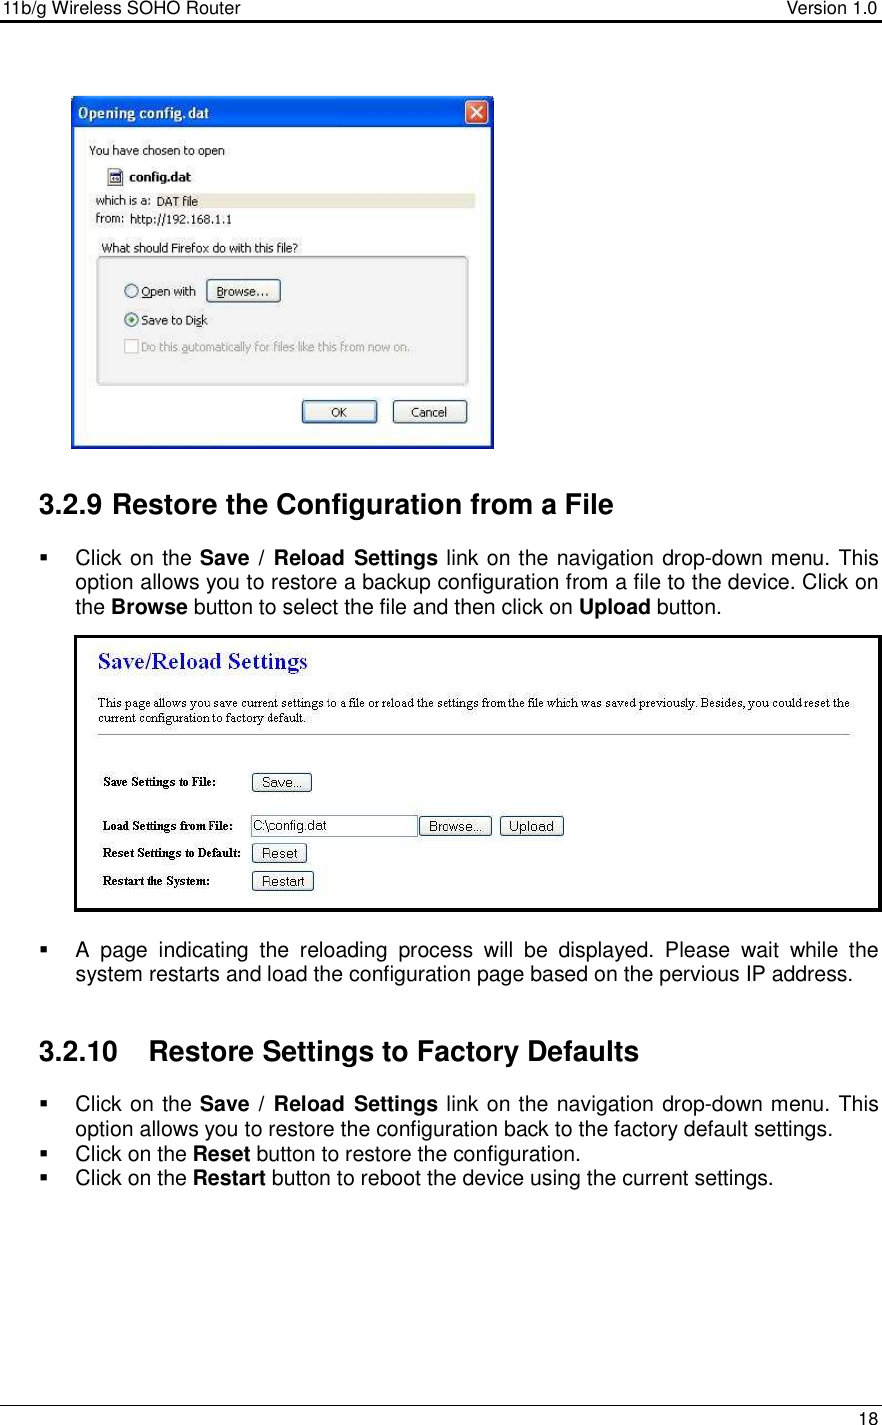 11b/g Wireless SOHO Router                                     Version 1.0    18                   3.2.9 Restore the Configuration from a File   Click on the Save /  Reload Settings link on the navigation drop-down menu. This option allows you to restore a backup configuration from a file to the device. Click on the Browse button to select the file and then click on Upload button.                A  page  indicating  the  reloading  process  will  be  displayed.  Please  wait  while  the system restarts and load the configuration page based on the pervious IP address.    3.2.10  Restore Settings to Factory Defaults   Click on the Save /  Reload Settings link on the navigation drop-down menu. This option allows you to restore the configuration back to the factory default settings.    Click on the Reset button to restore the configuration.   Click on the Restart button to reboot the device using the current settings.           